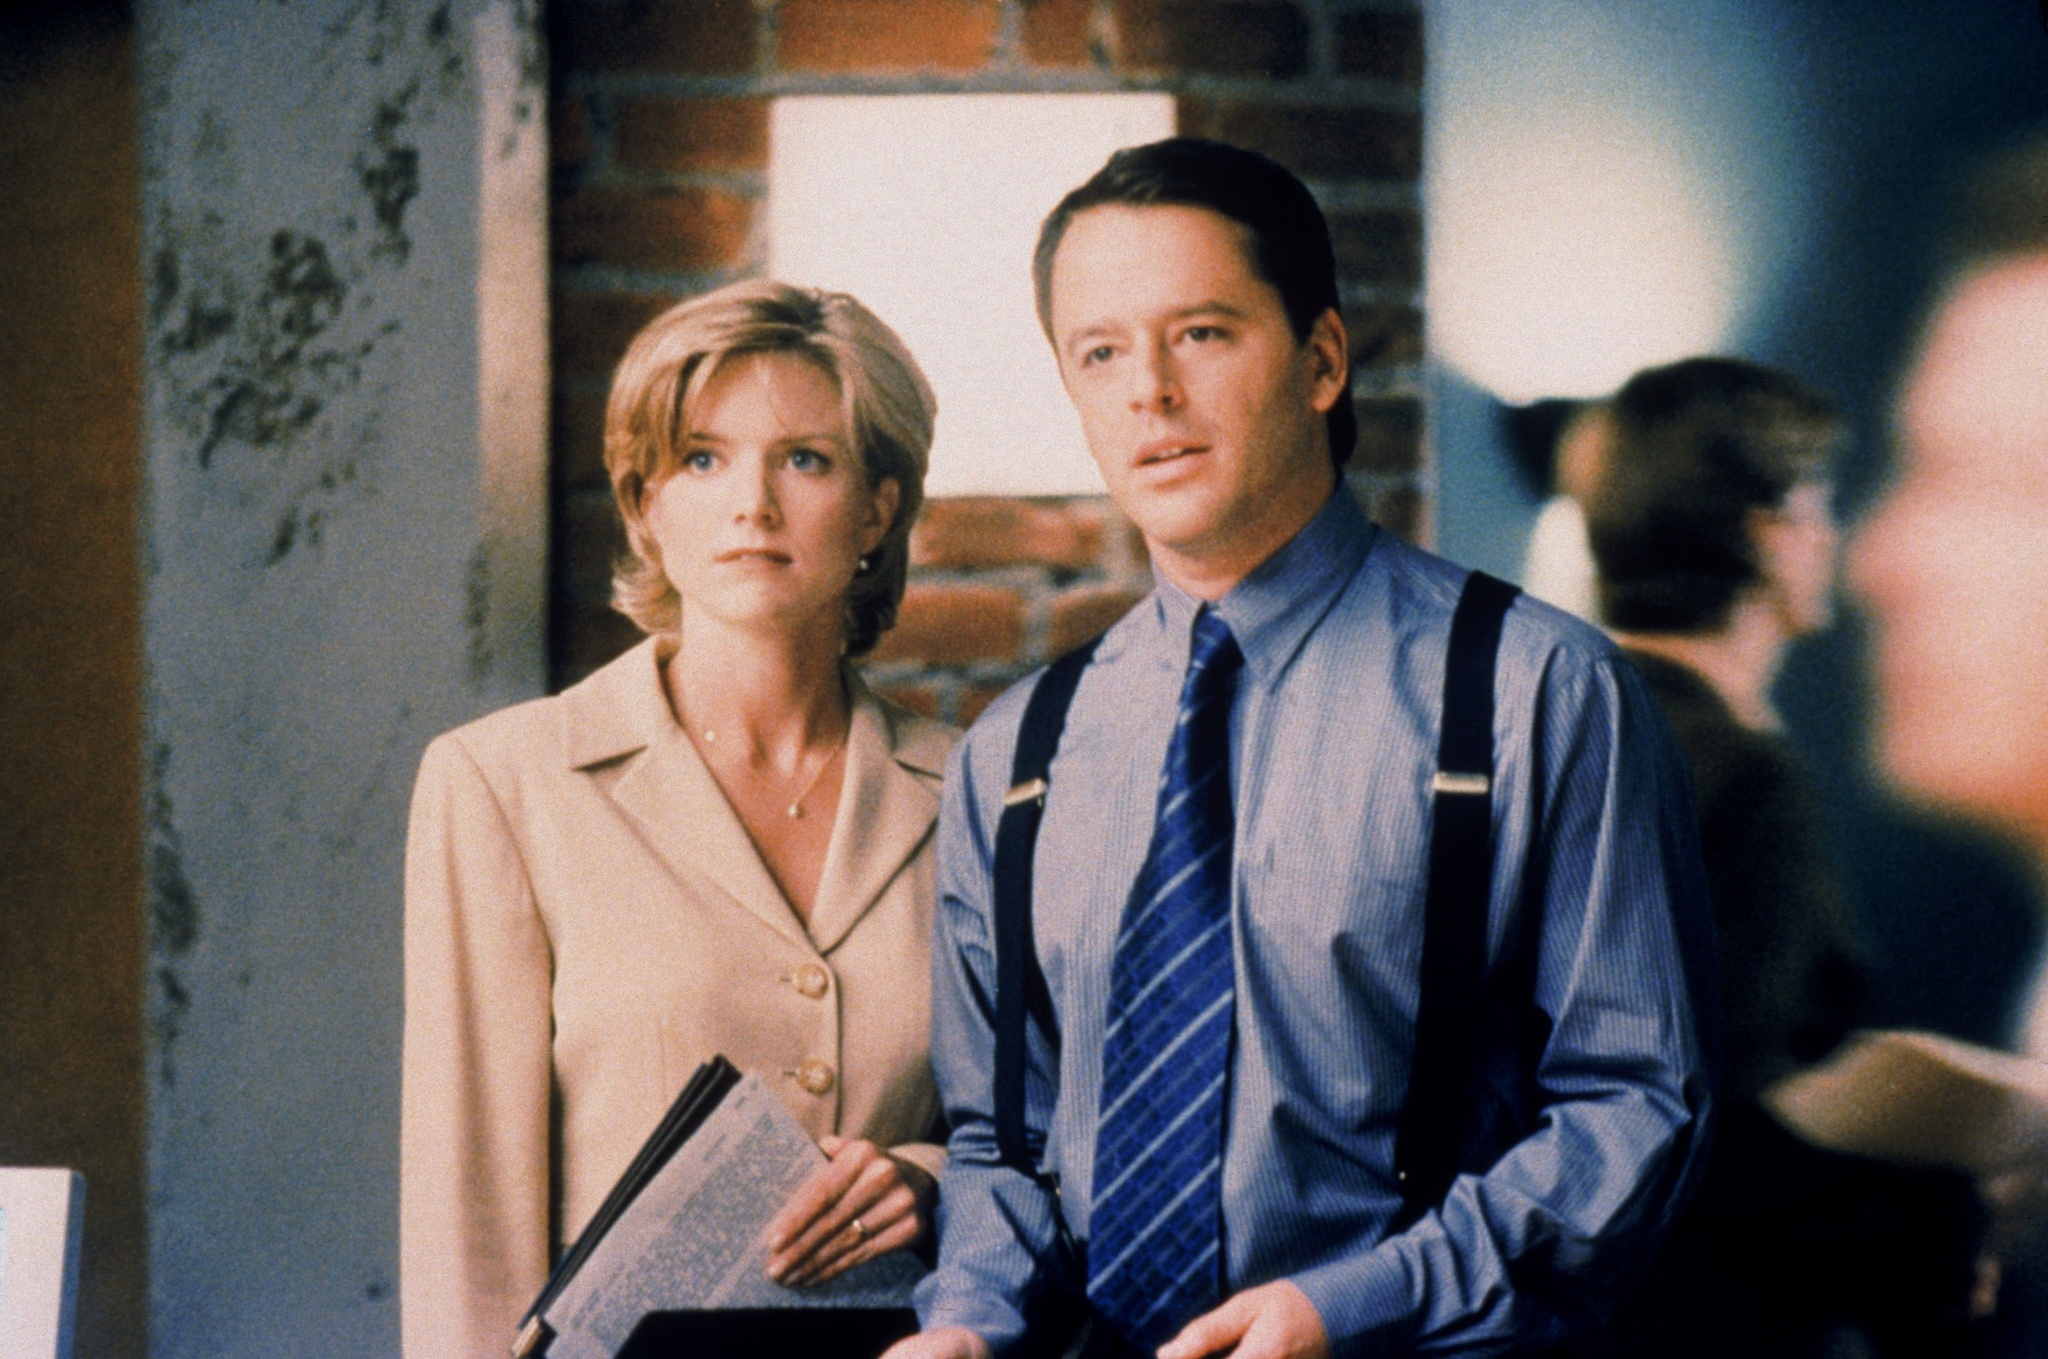 Still of Gil Bellows and Courtney Thorne-Smith in Ally McBeal (1997)